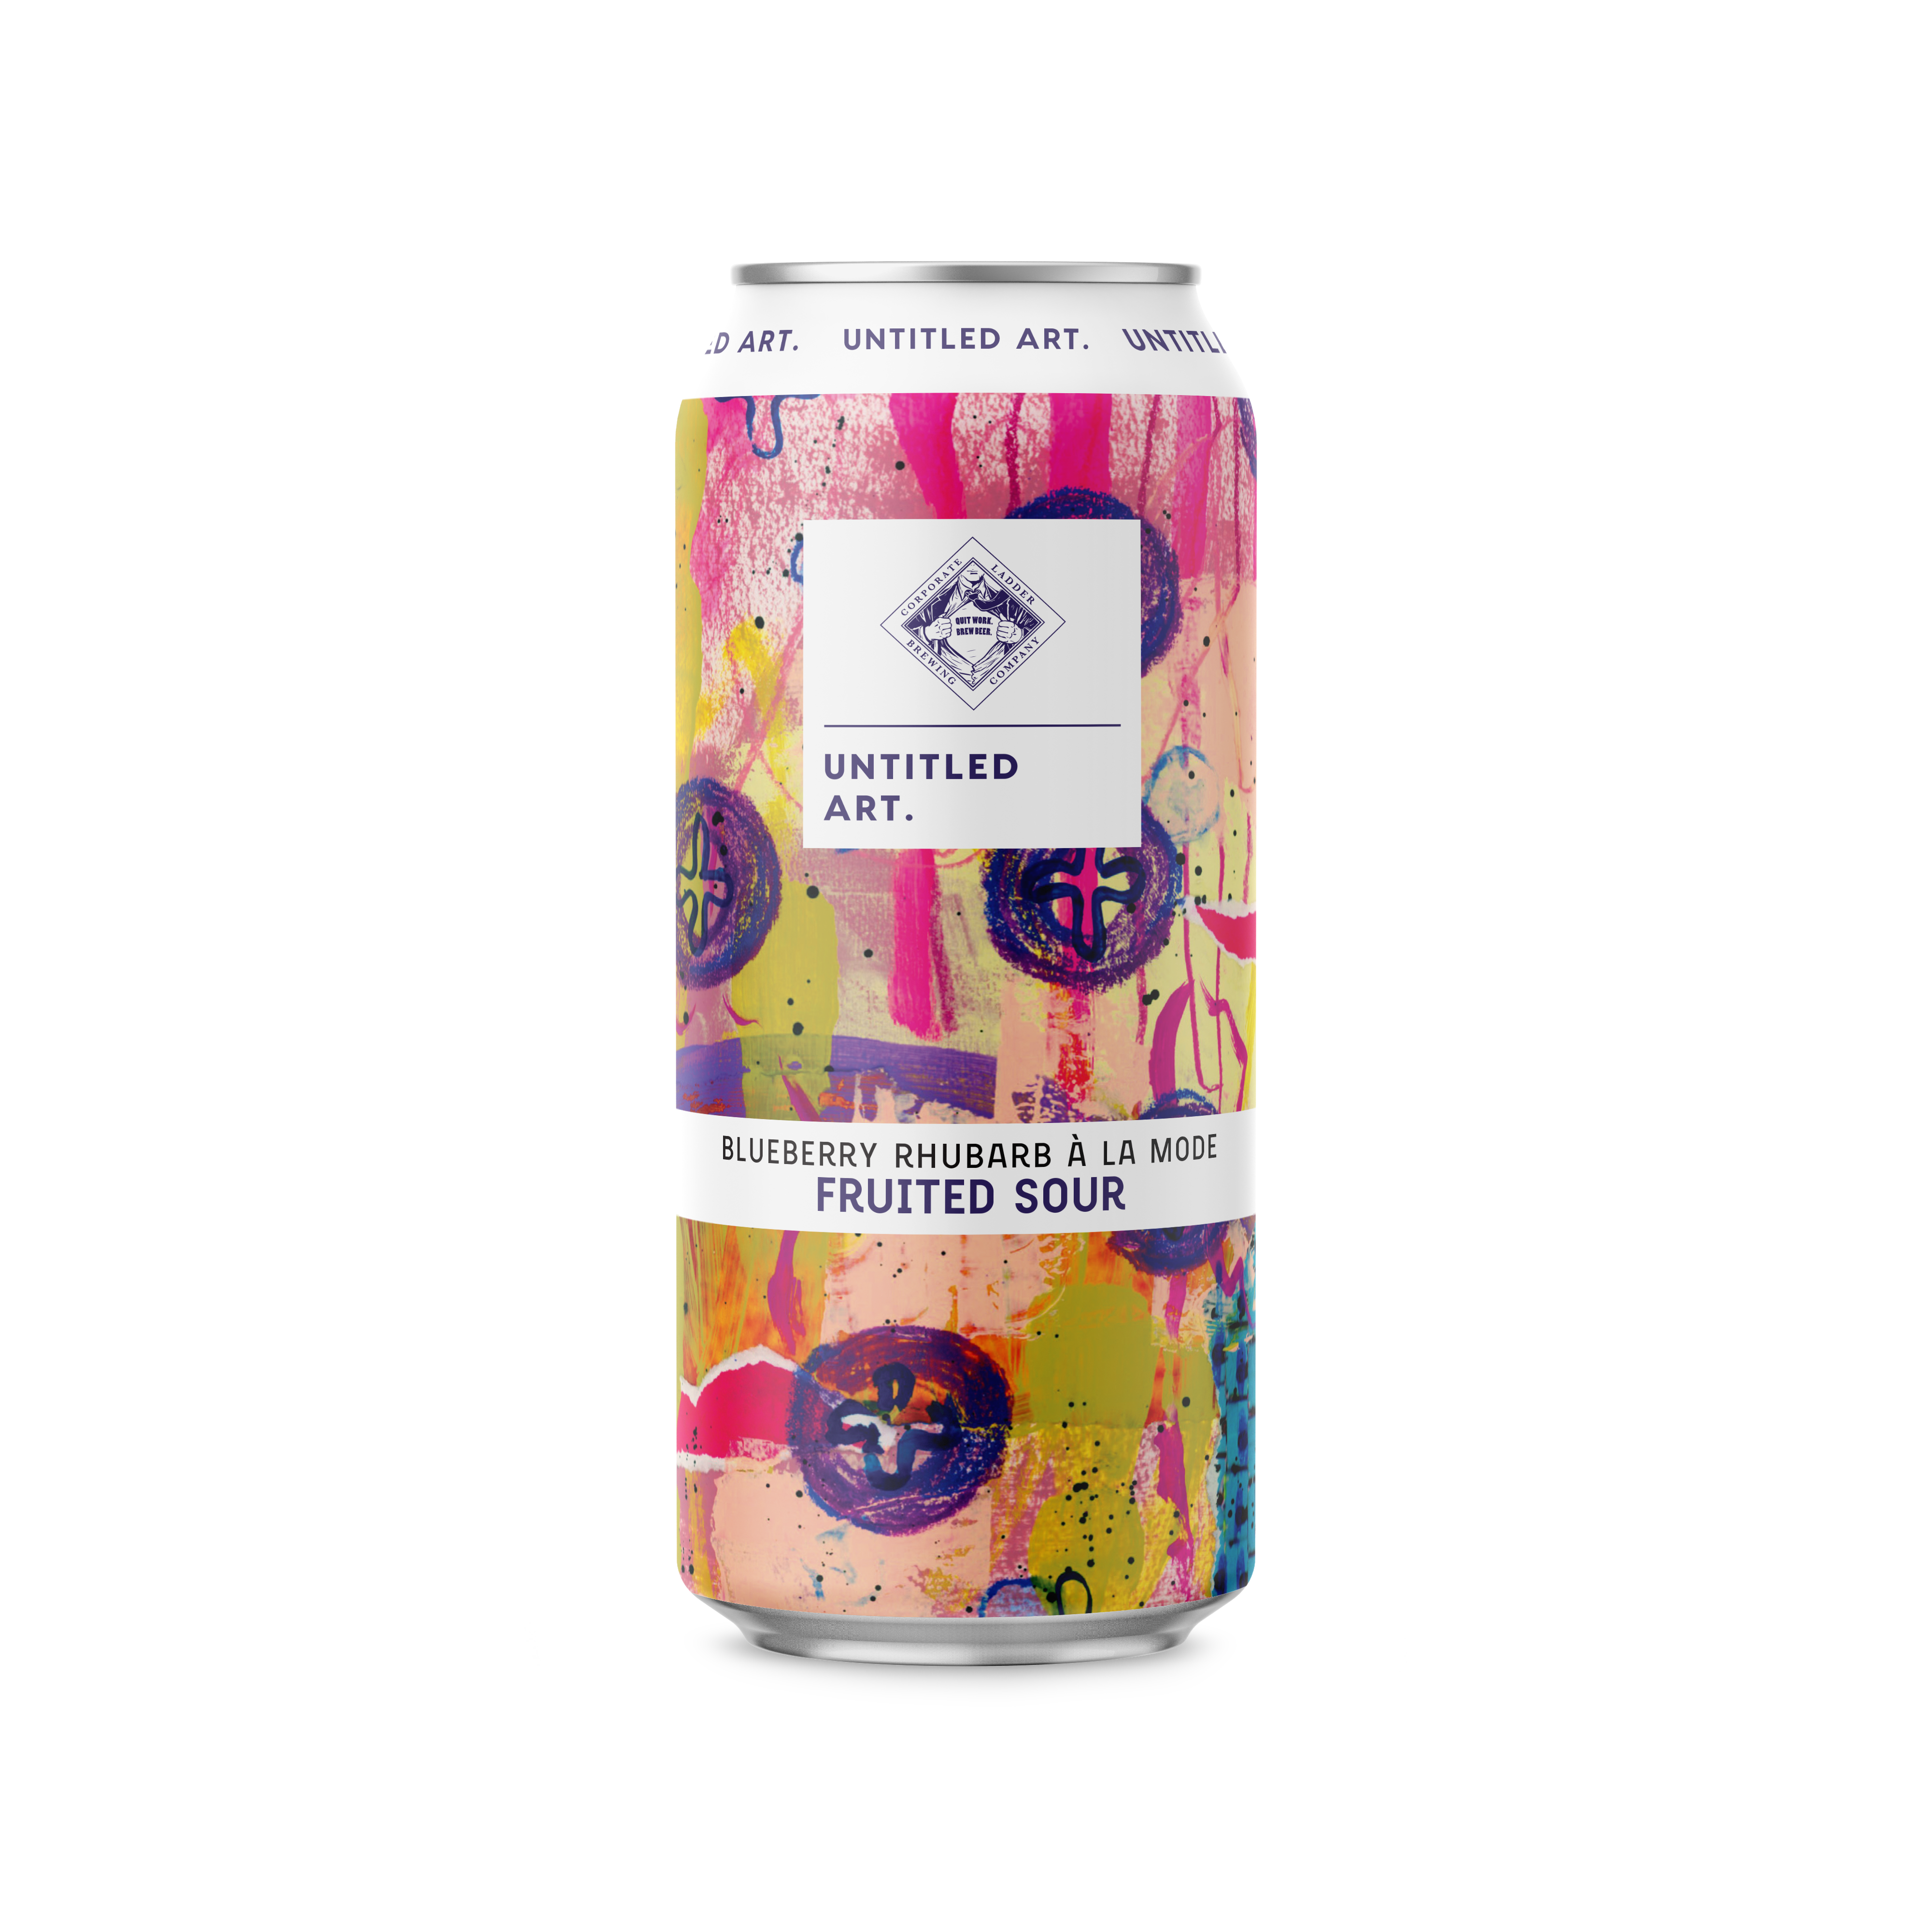 A can with a colorful design on it.